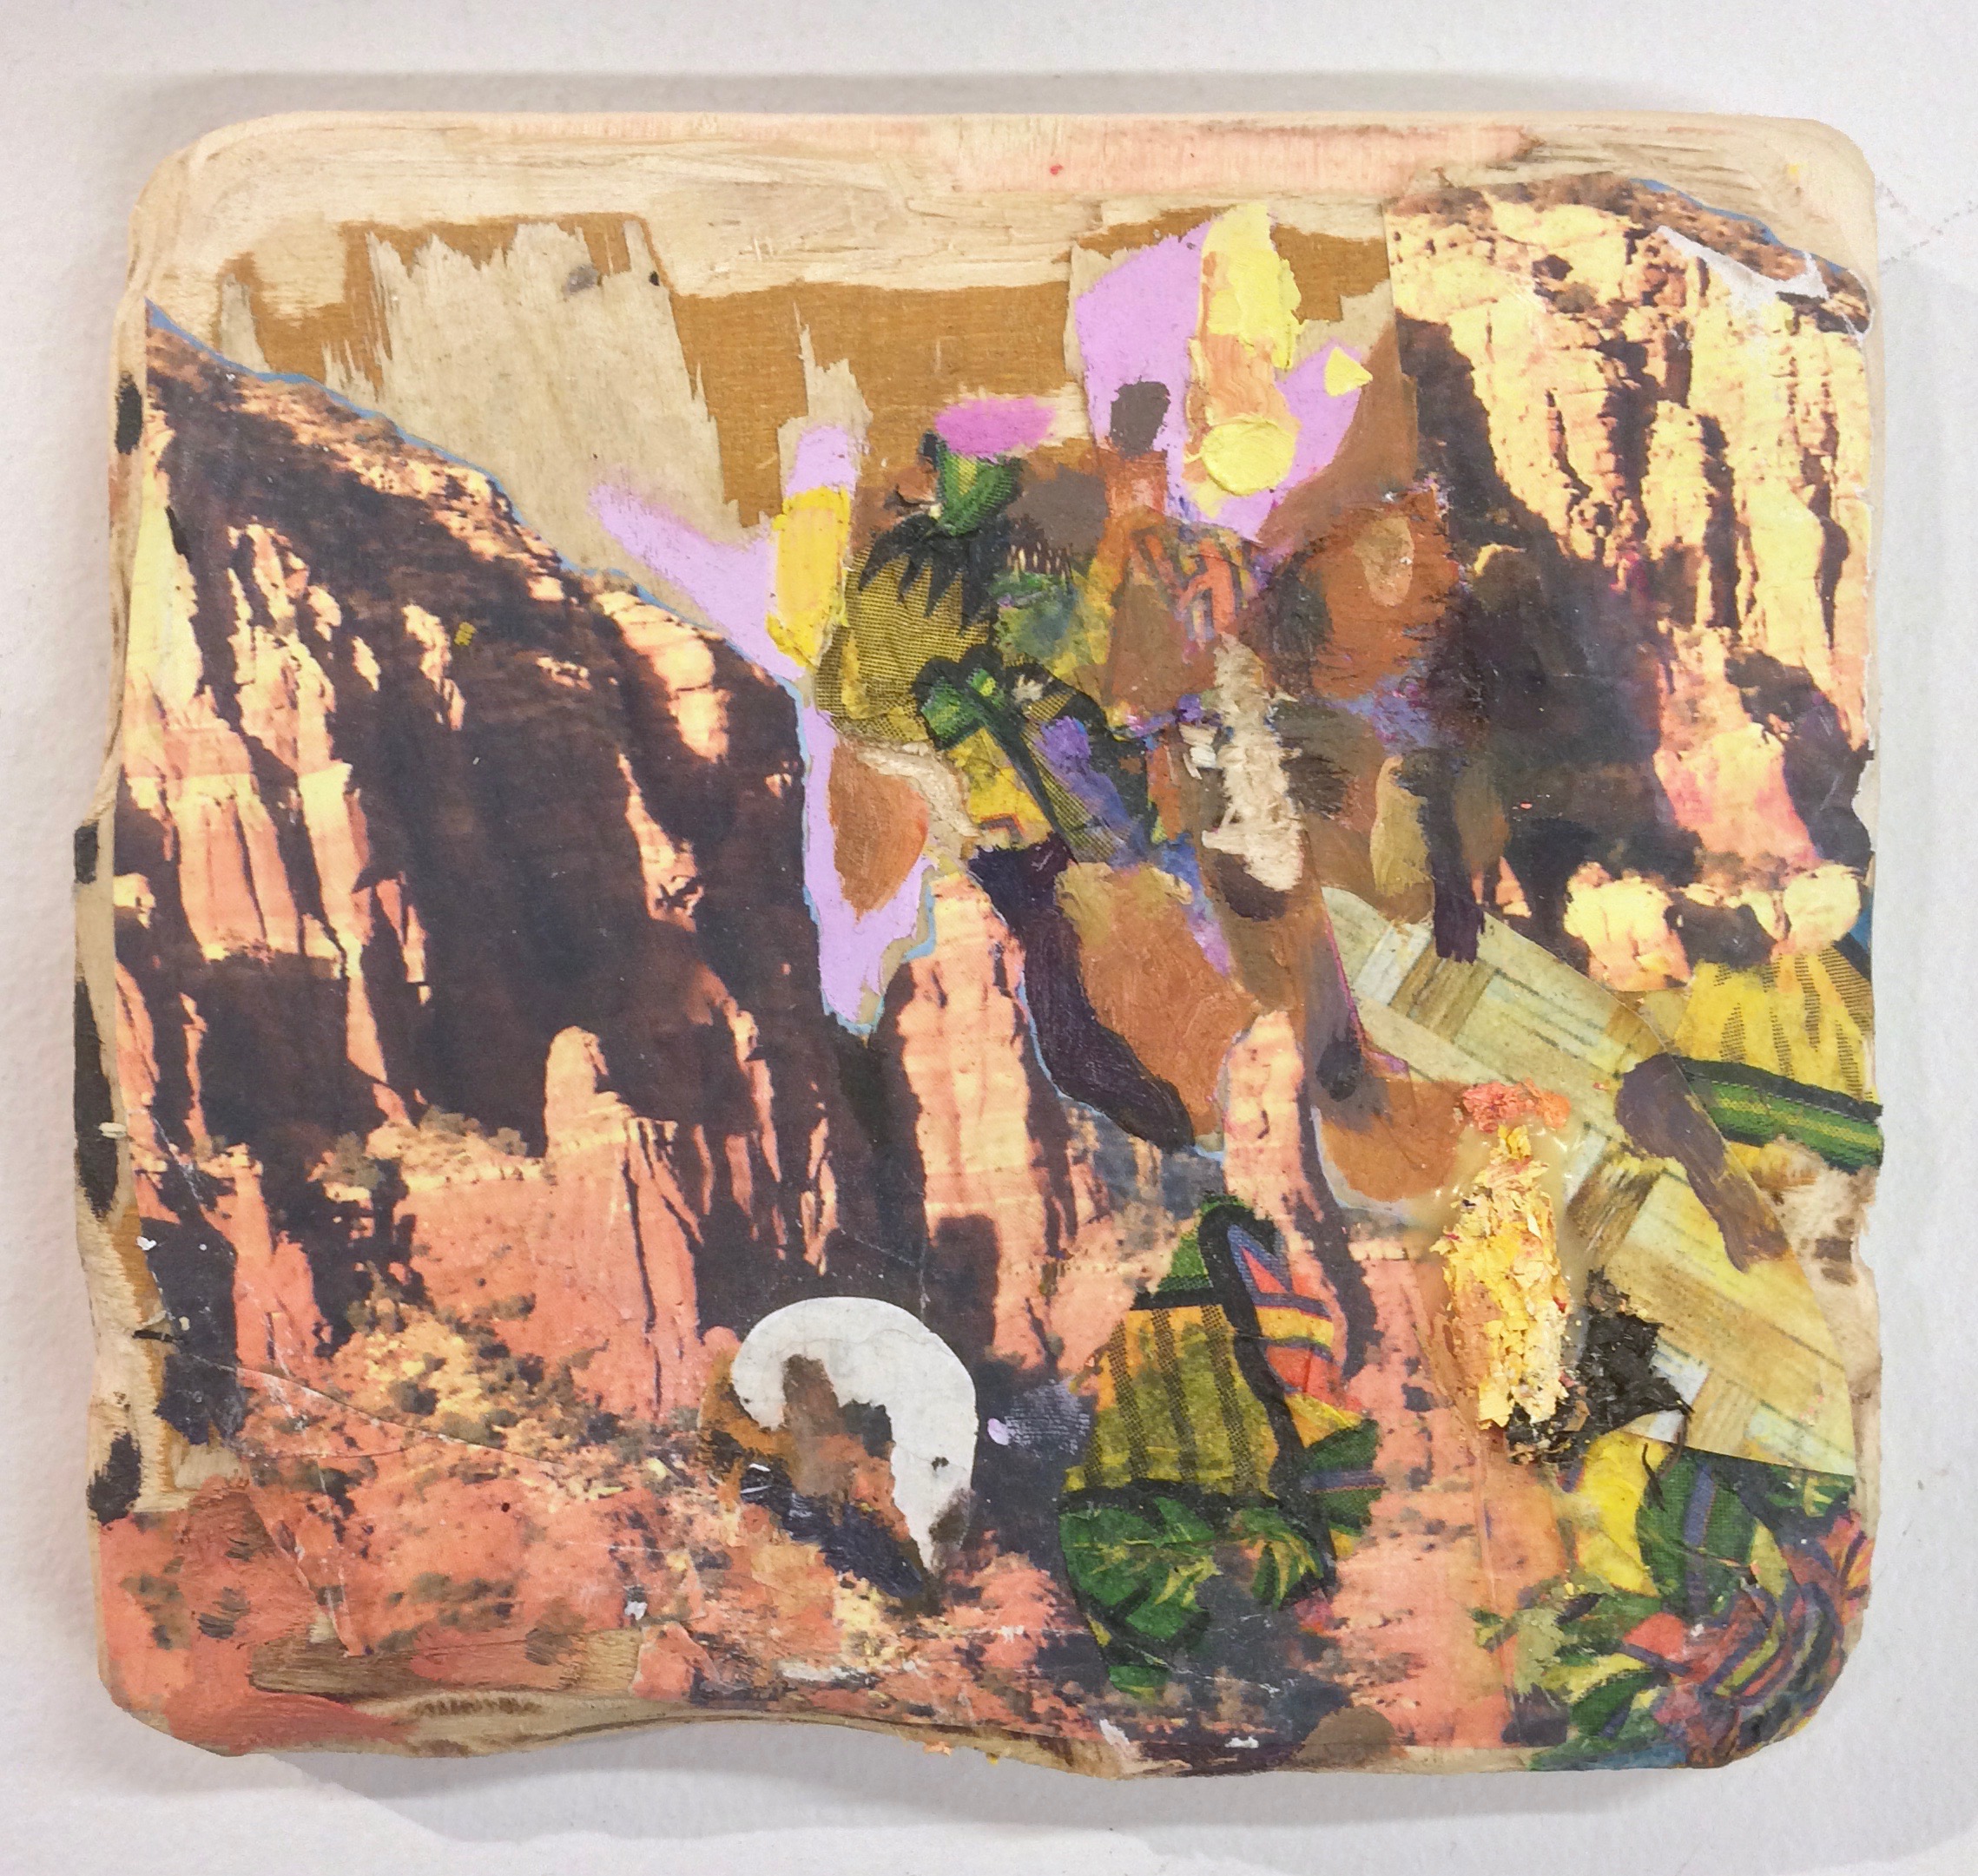   Canyon , 2016, oil, nature calendars and party napkin on carved wood, 5.5 x 6 inches 